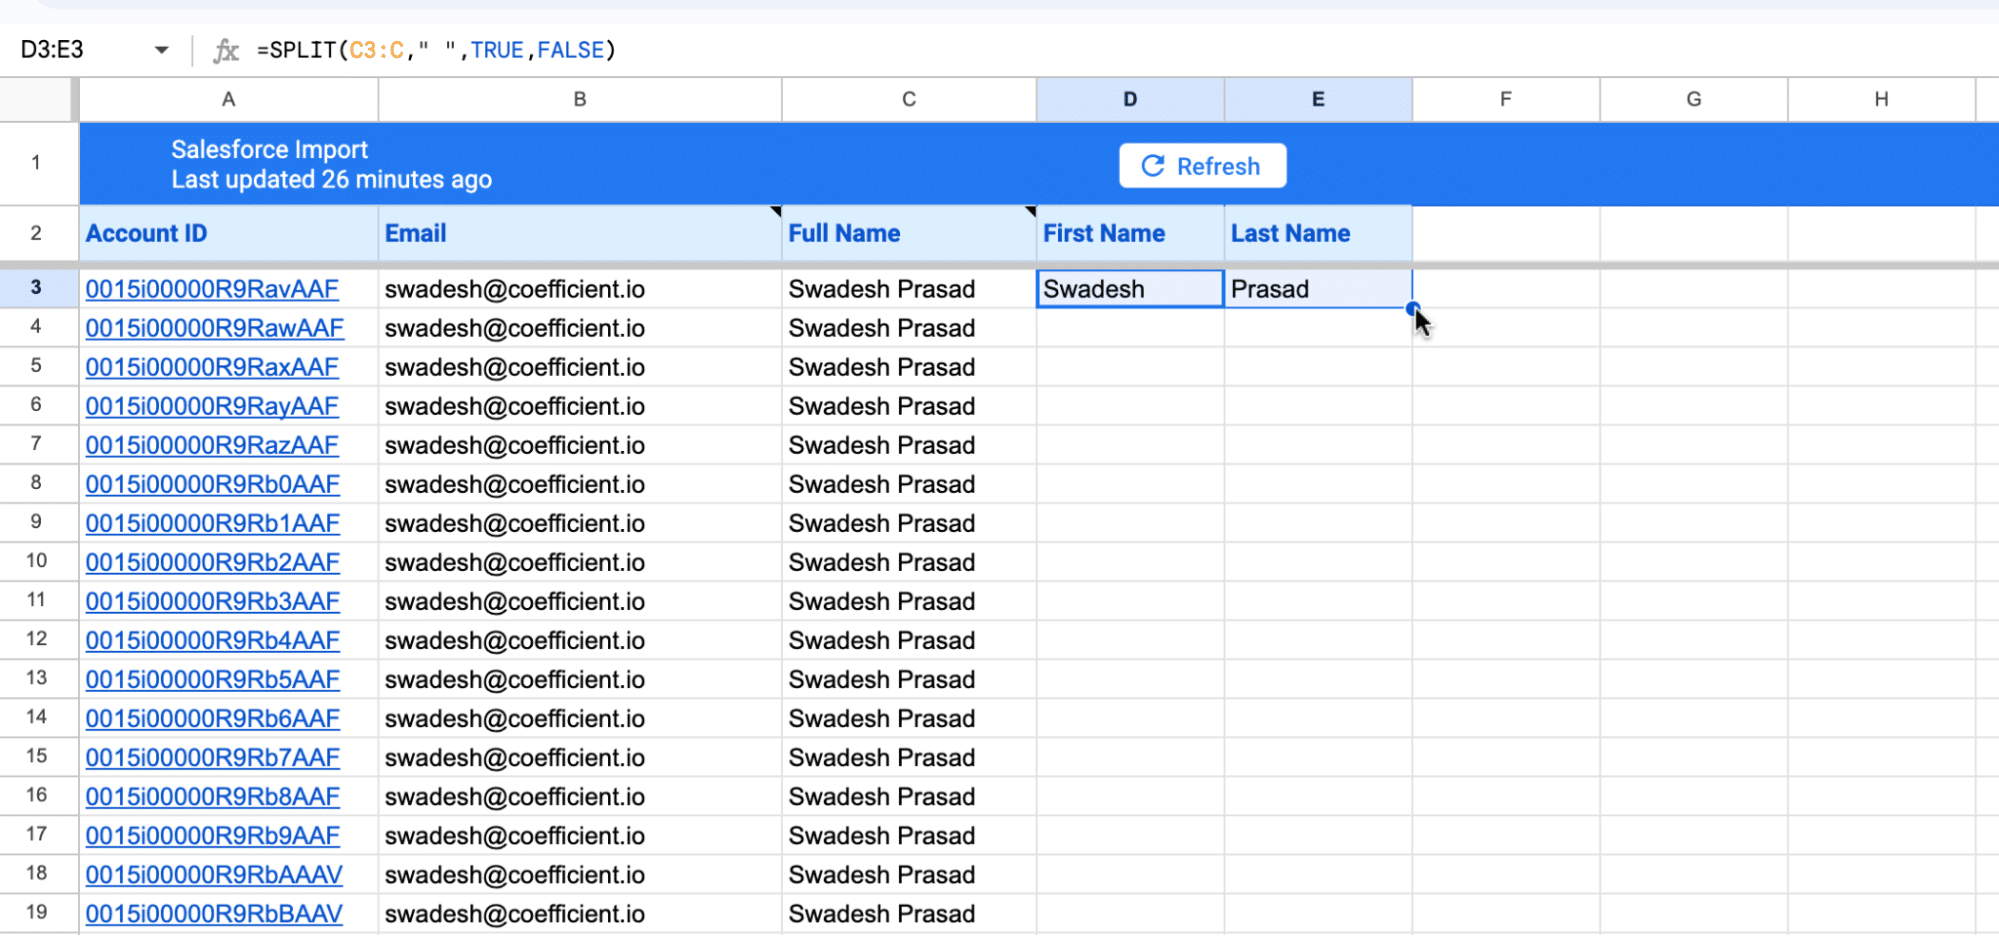 Paste the formula in the cell and drag it down to apply to each row 